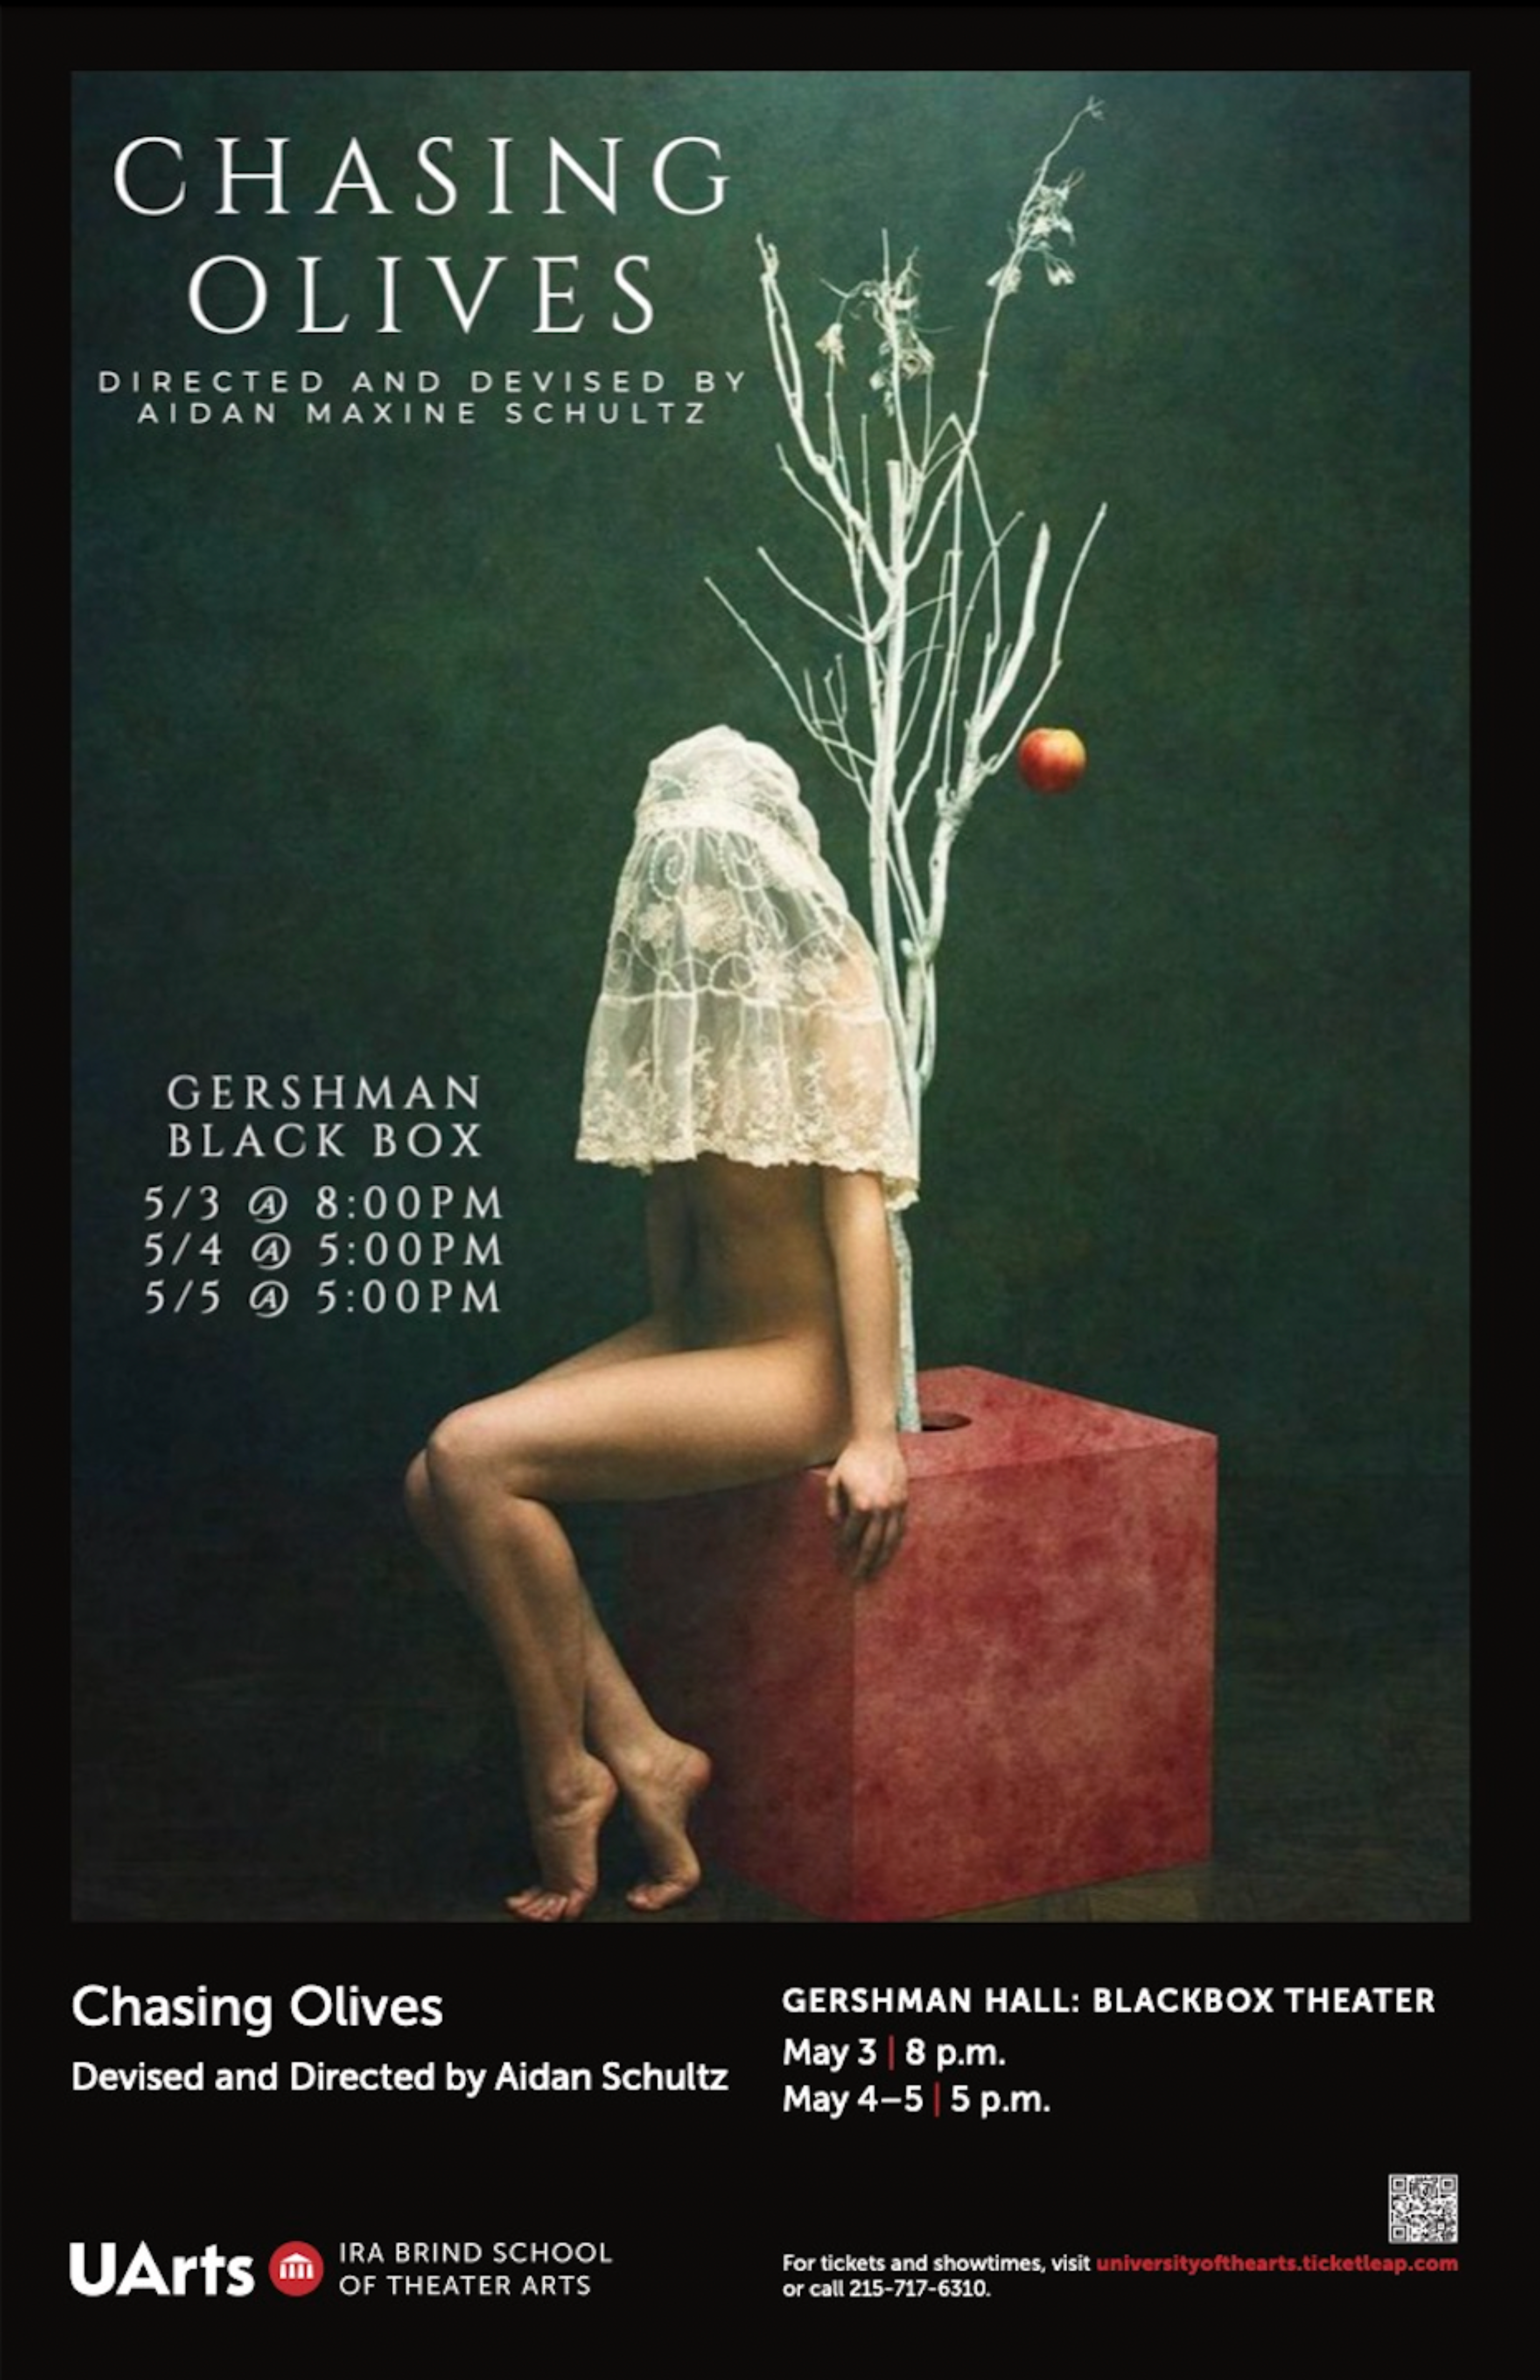 A person sitting on a red square planter, with a white tree growing out of it/ The tree is mostly barren with one apple. The person is nude aside from a veil covering their face. The backdrop is dark green. The image reads “Chasing Olives Directed and Devisied by Aidan Maxine Schultz, Gershman Black Box 5/3 @ 8 PM, 5/4 @ 5:00PM, 5/5 @ 5:00 PM” and “For tickets and showtimes, visit universityofthearts.ticketleap.com or call 215-717-6310.” 